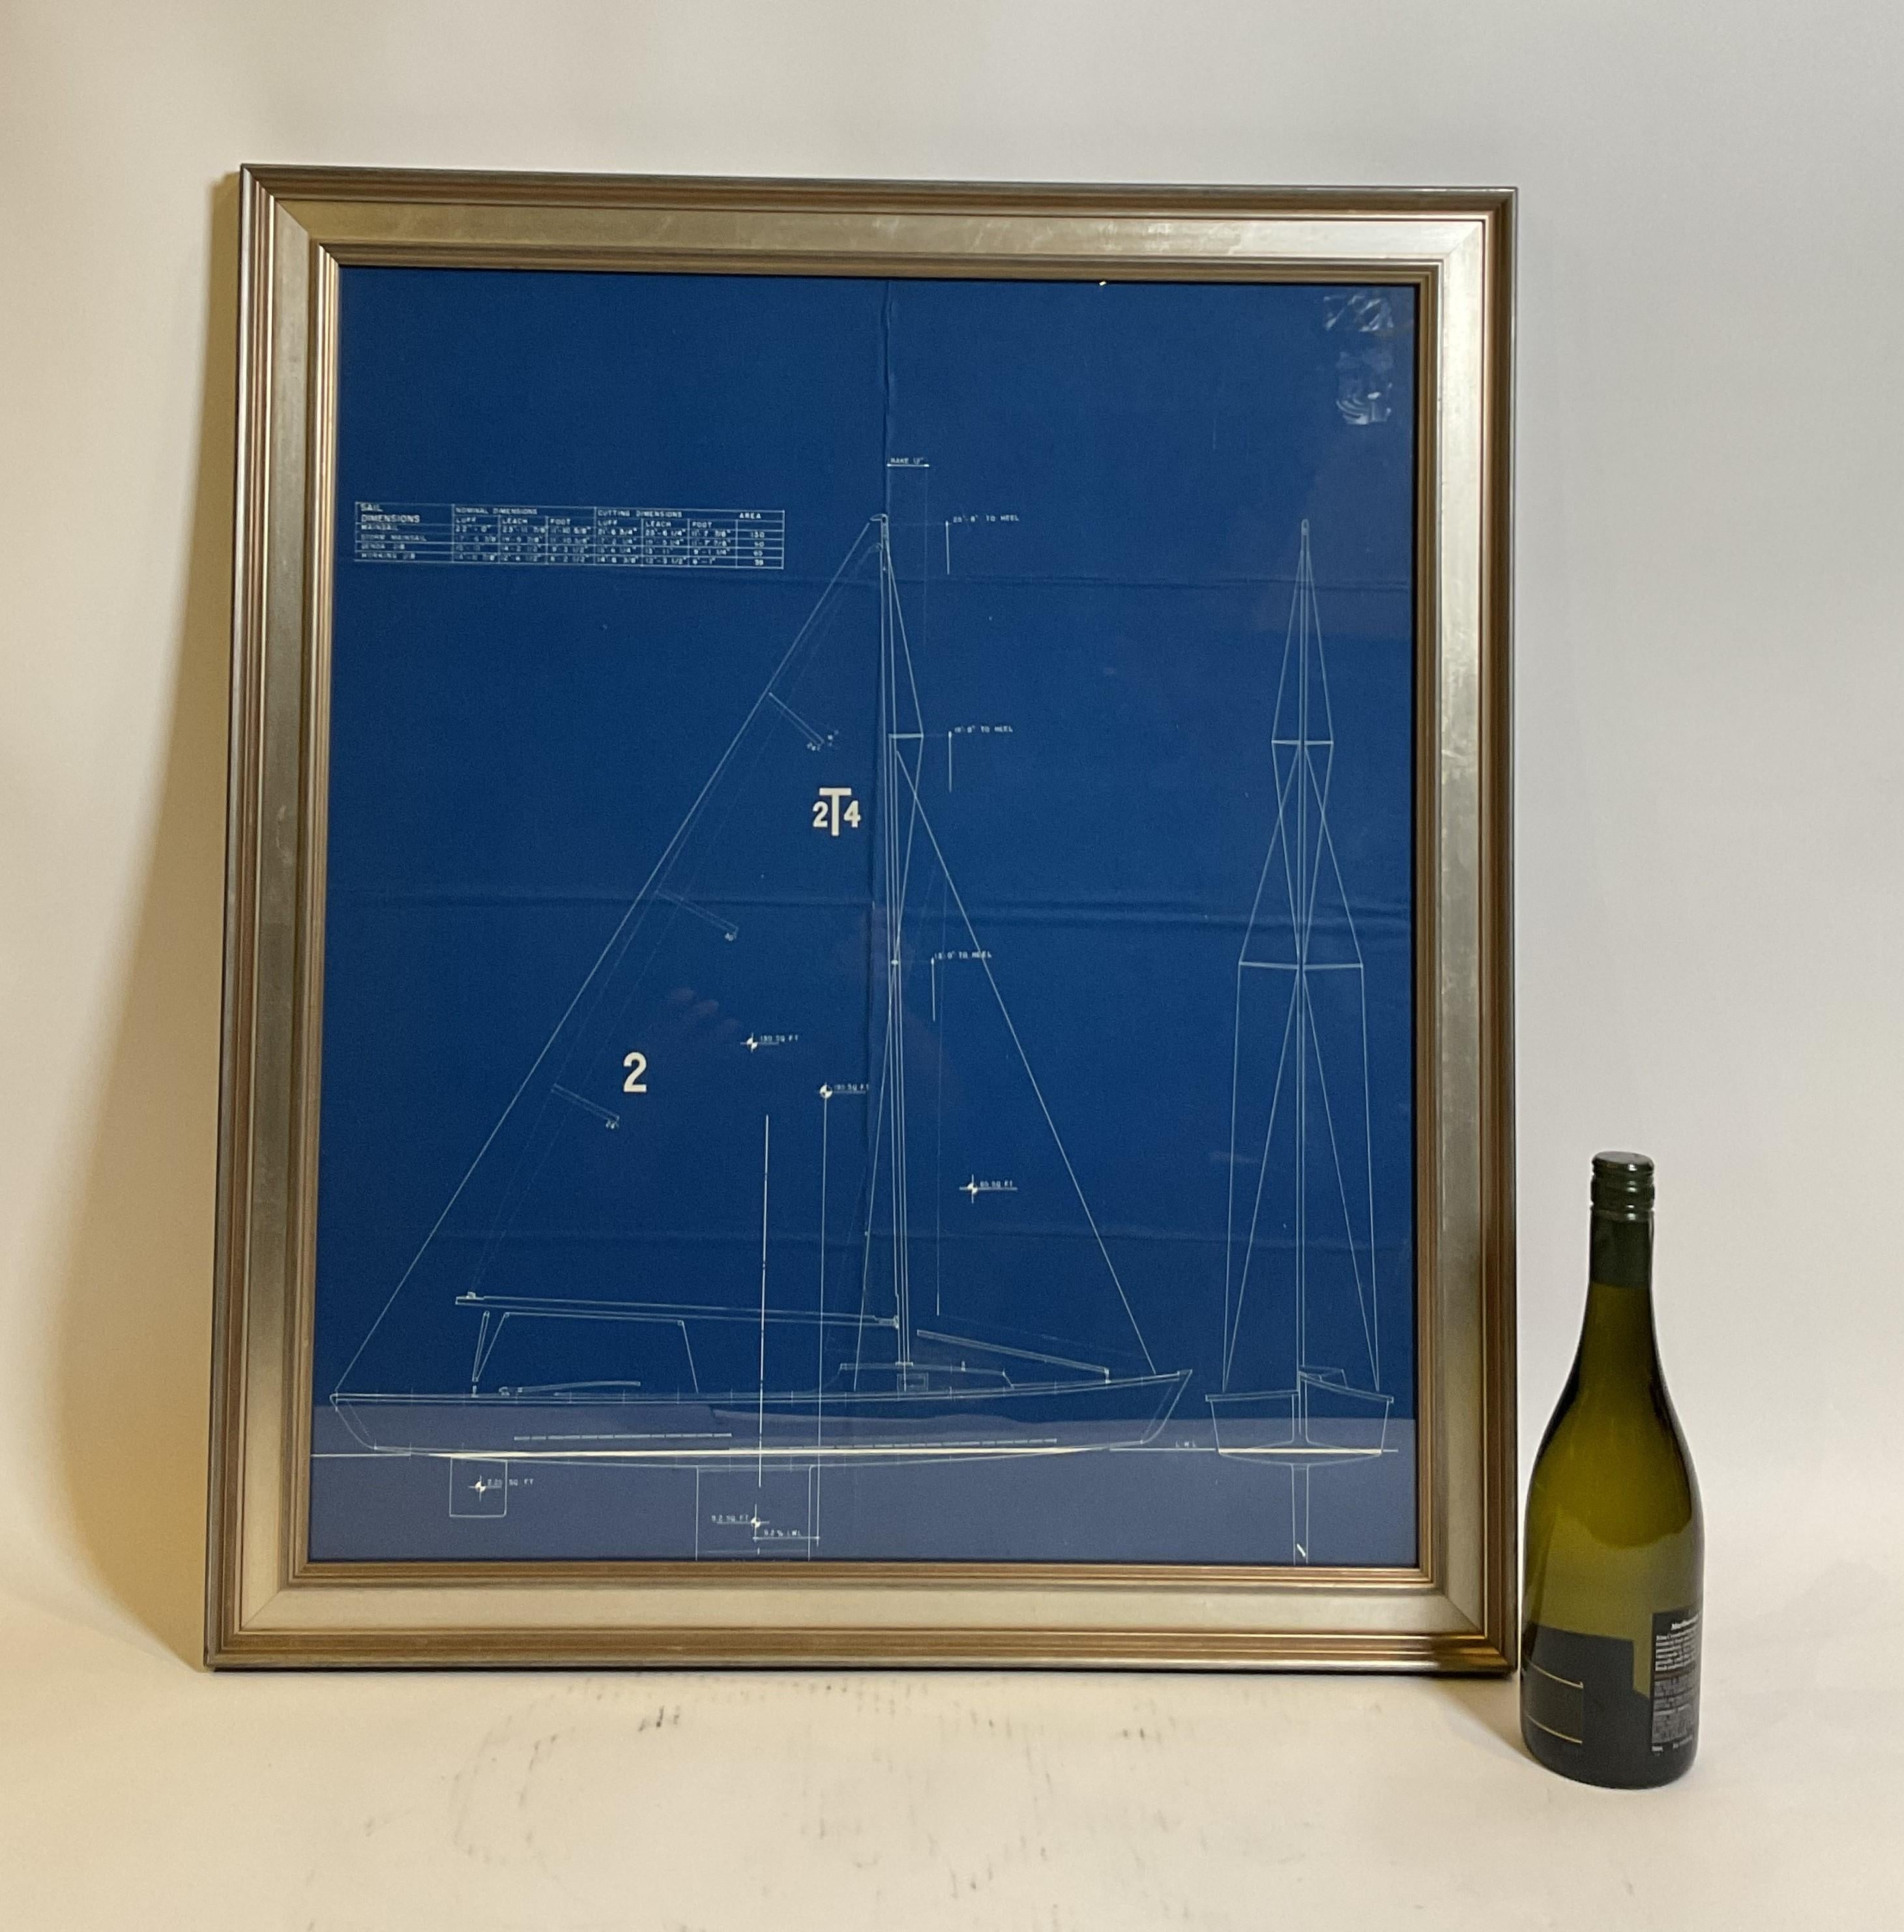 Original blueprint showing the sail plan for a racing yacht with a 